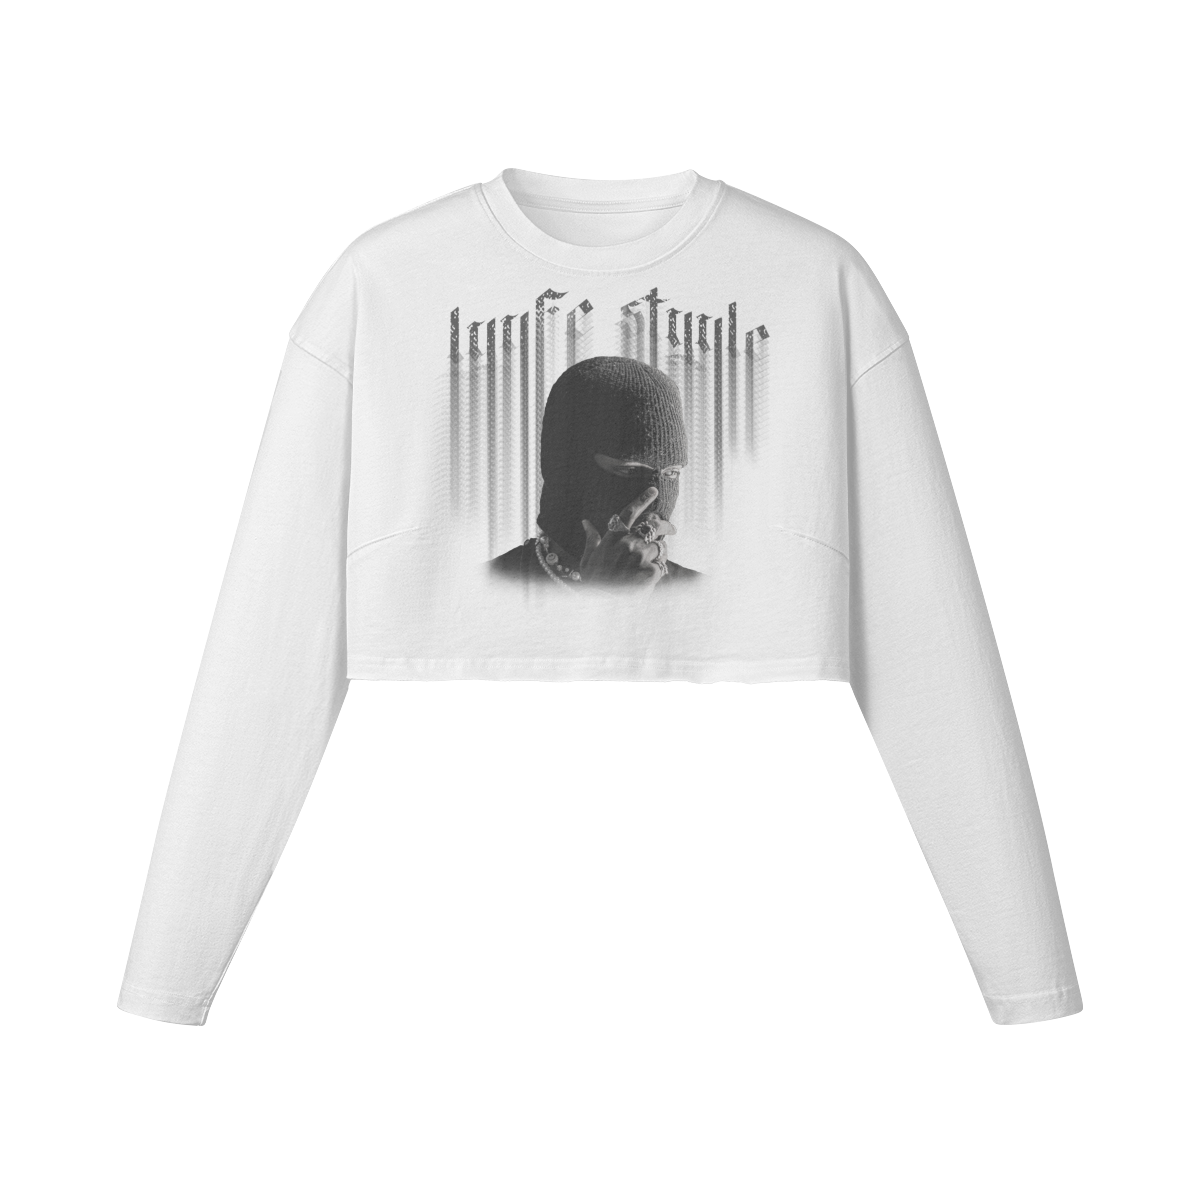 Shiesty Cropped Long Sleeve White Tee